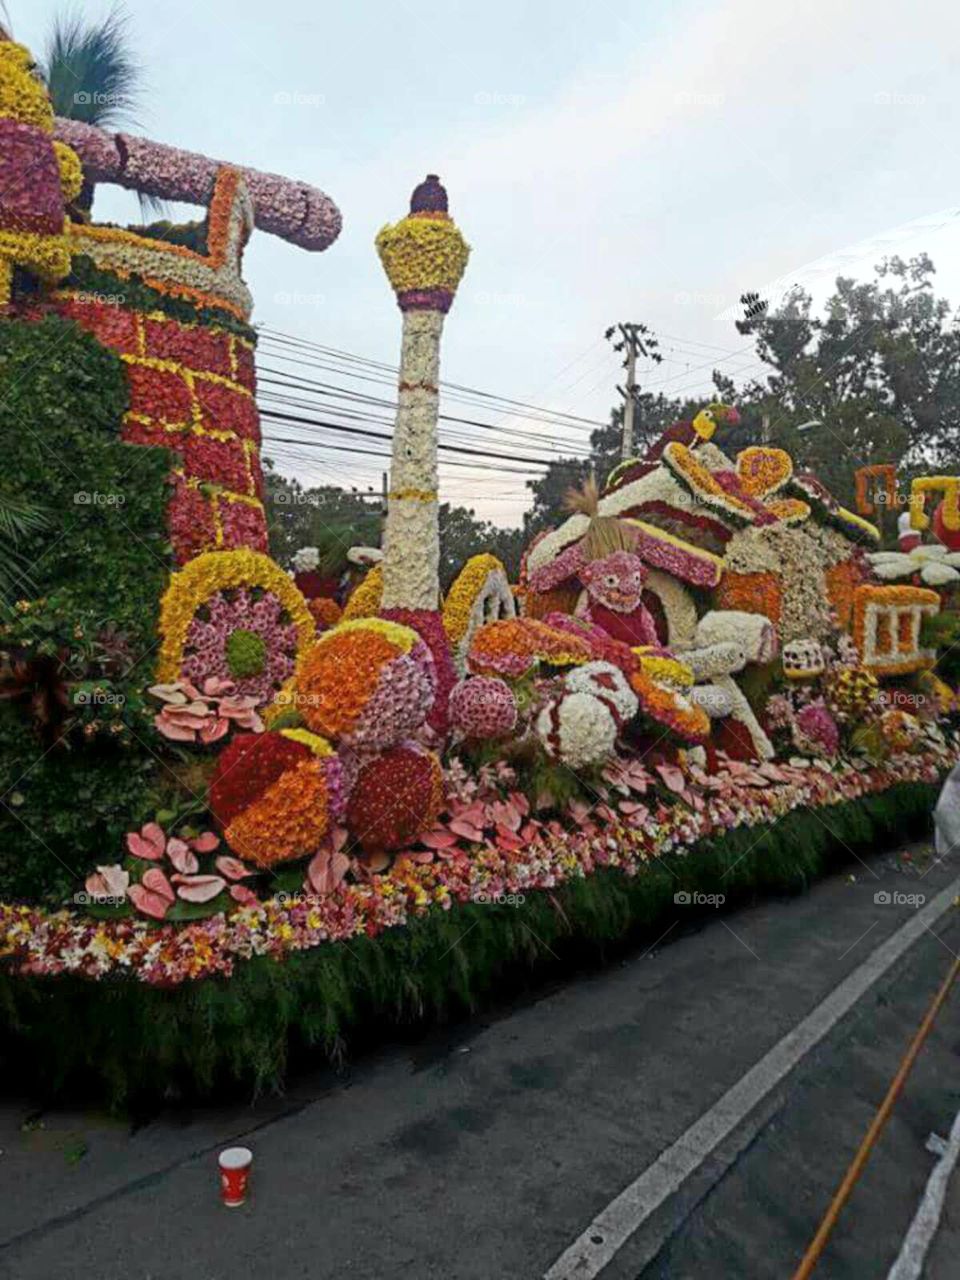 Panagbenga Festival at Baguio City, Philippines.

Also known as flower festival, It is a konth-long annual flower festival occuring in Baguio. The term is of Kankanaey origin, meaning "season of blooming"